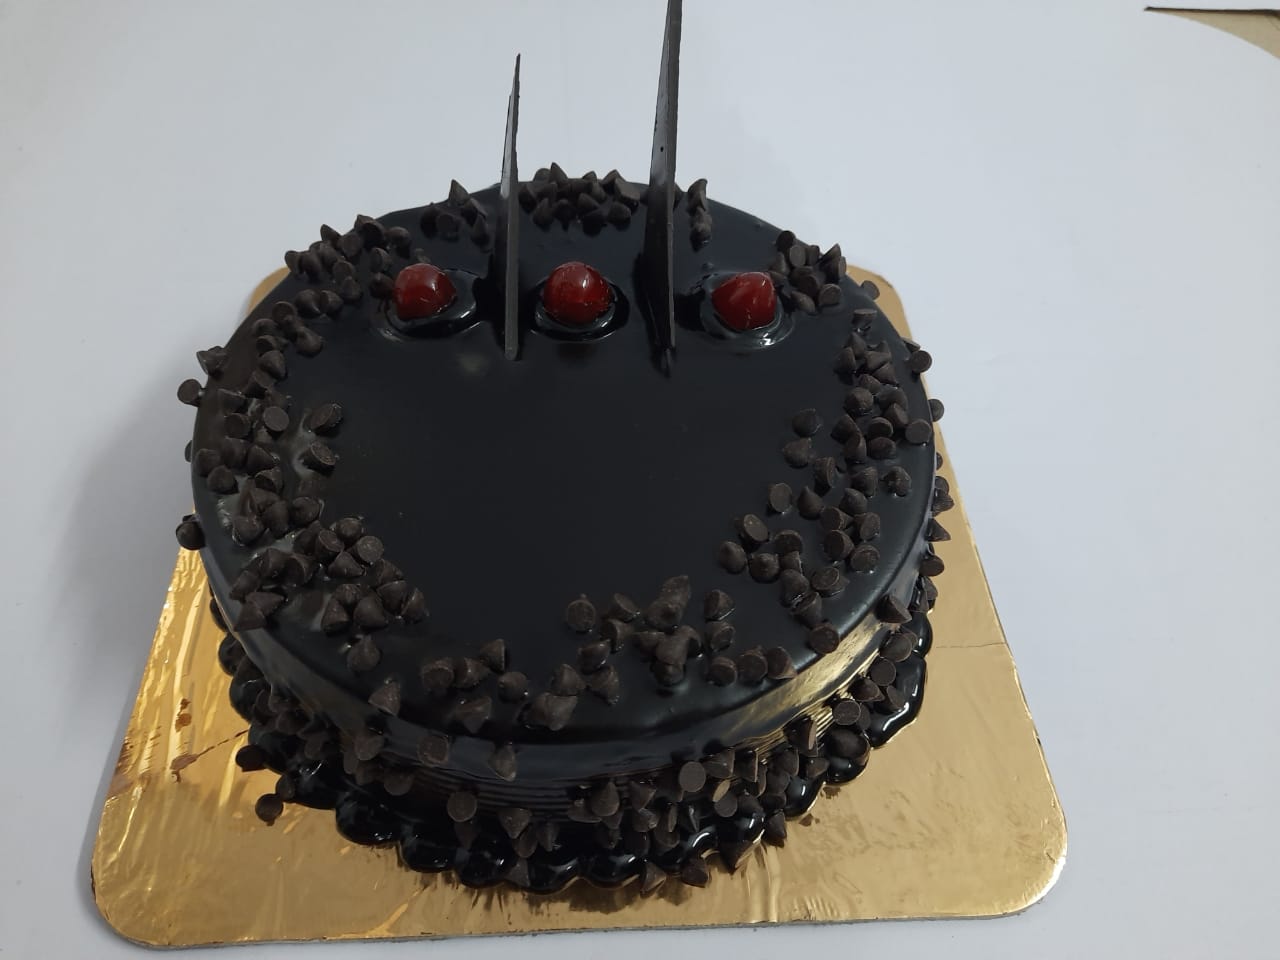 Eggless Chocolate Choco Chips Cake For Same Day Delivery